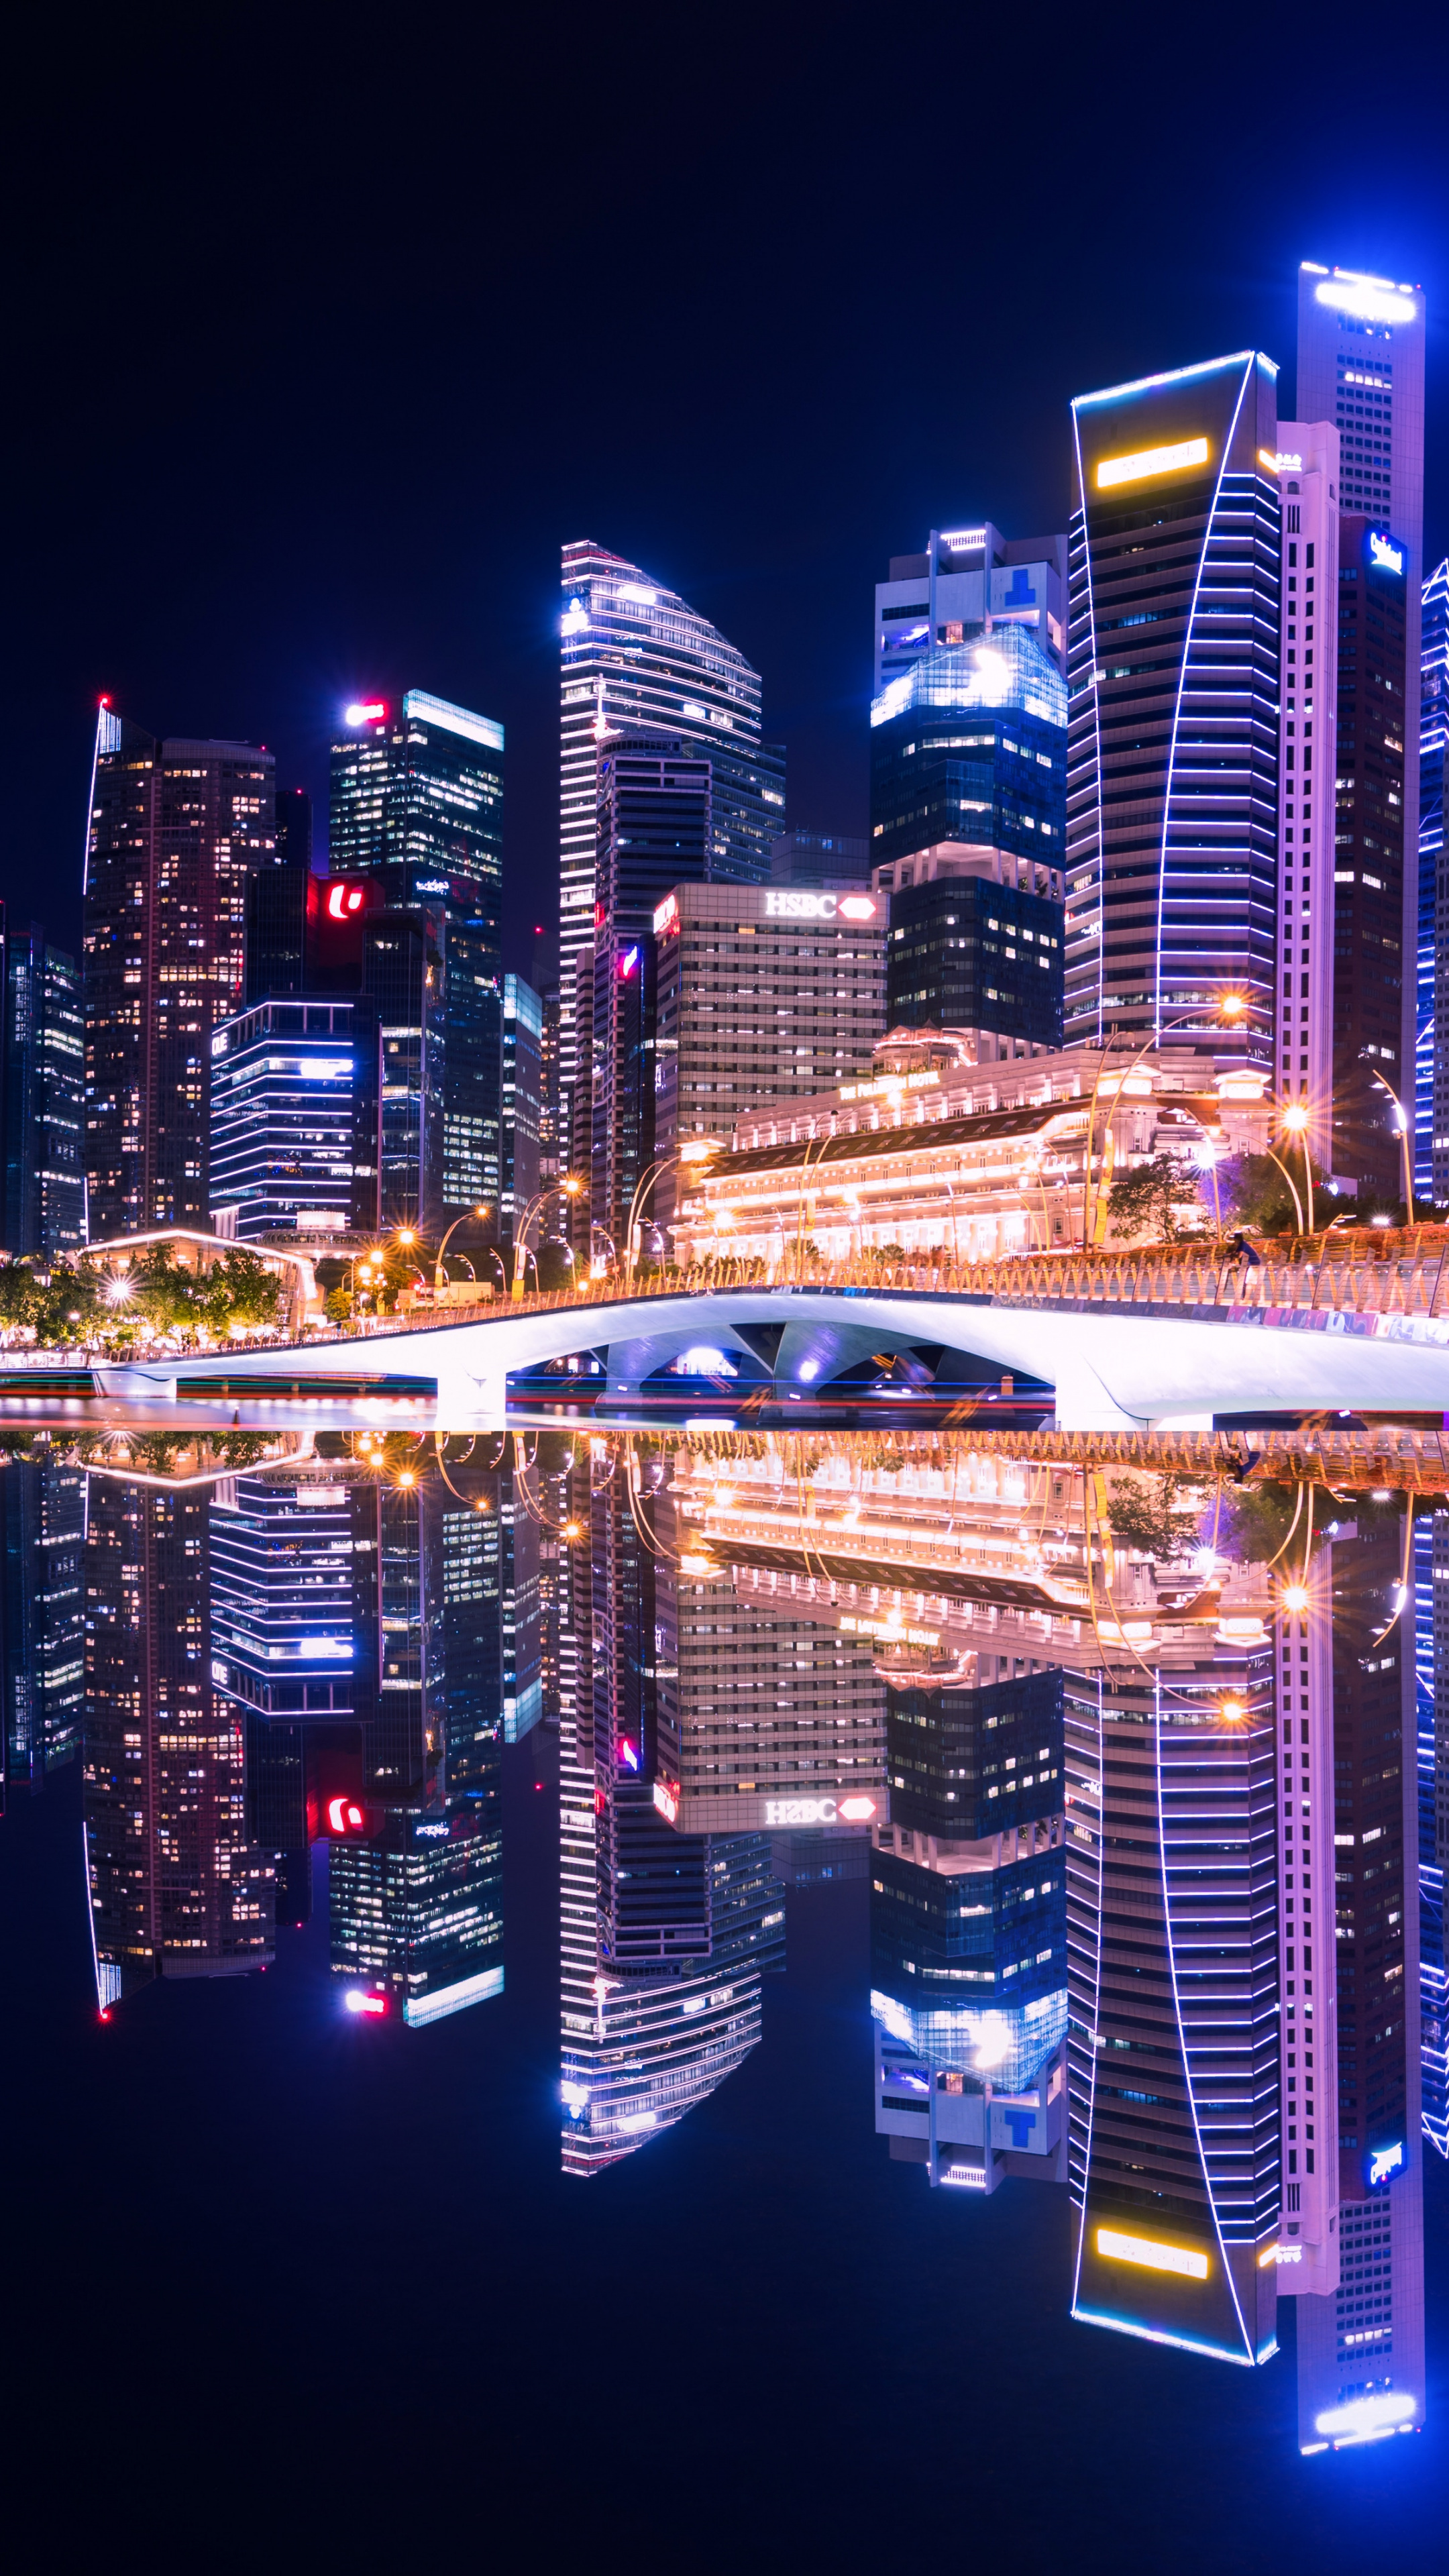 City: Marina Bay, Merlion Park, The Central Area of Singapore, Reflections at night. 2160x3840 4K Wallpaper.